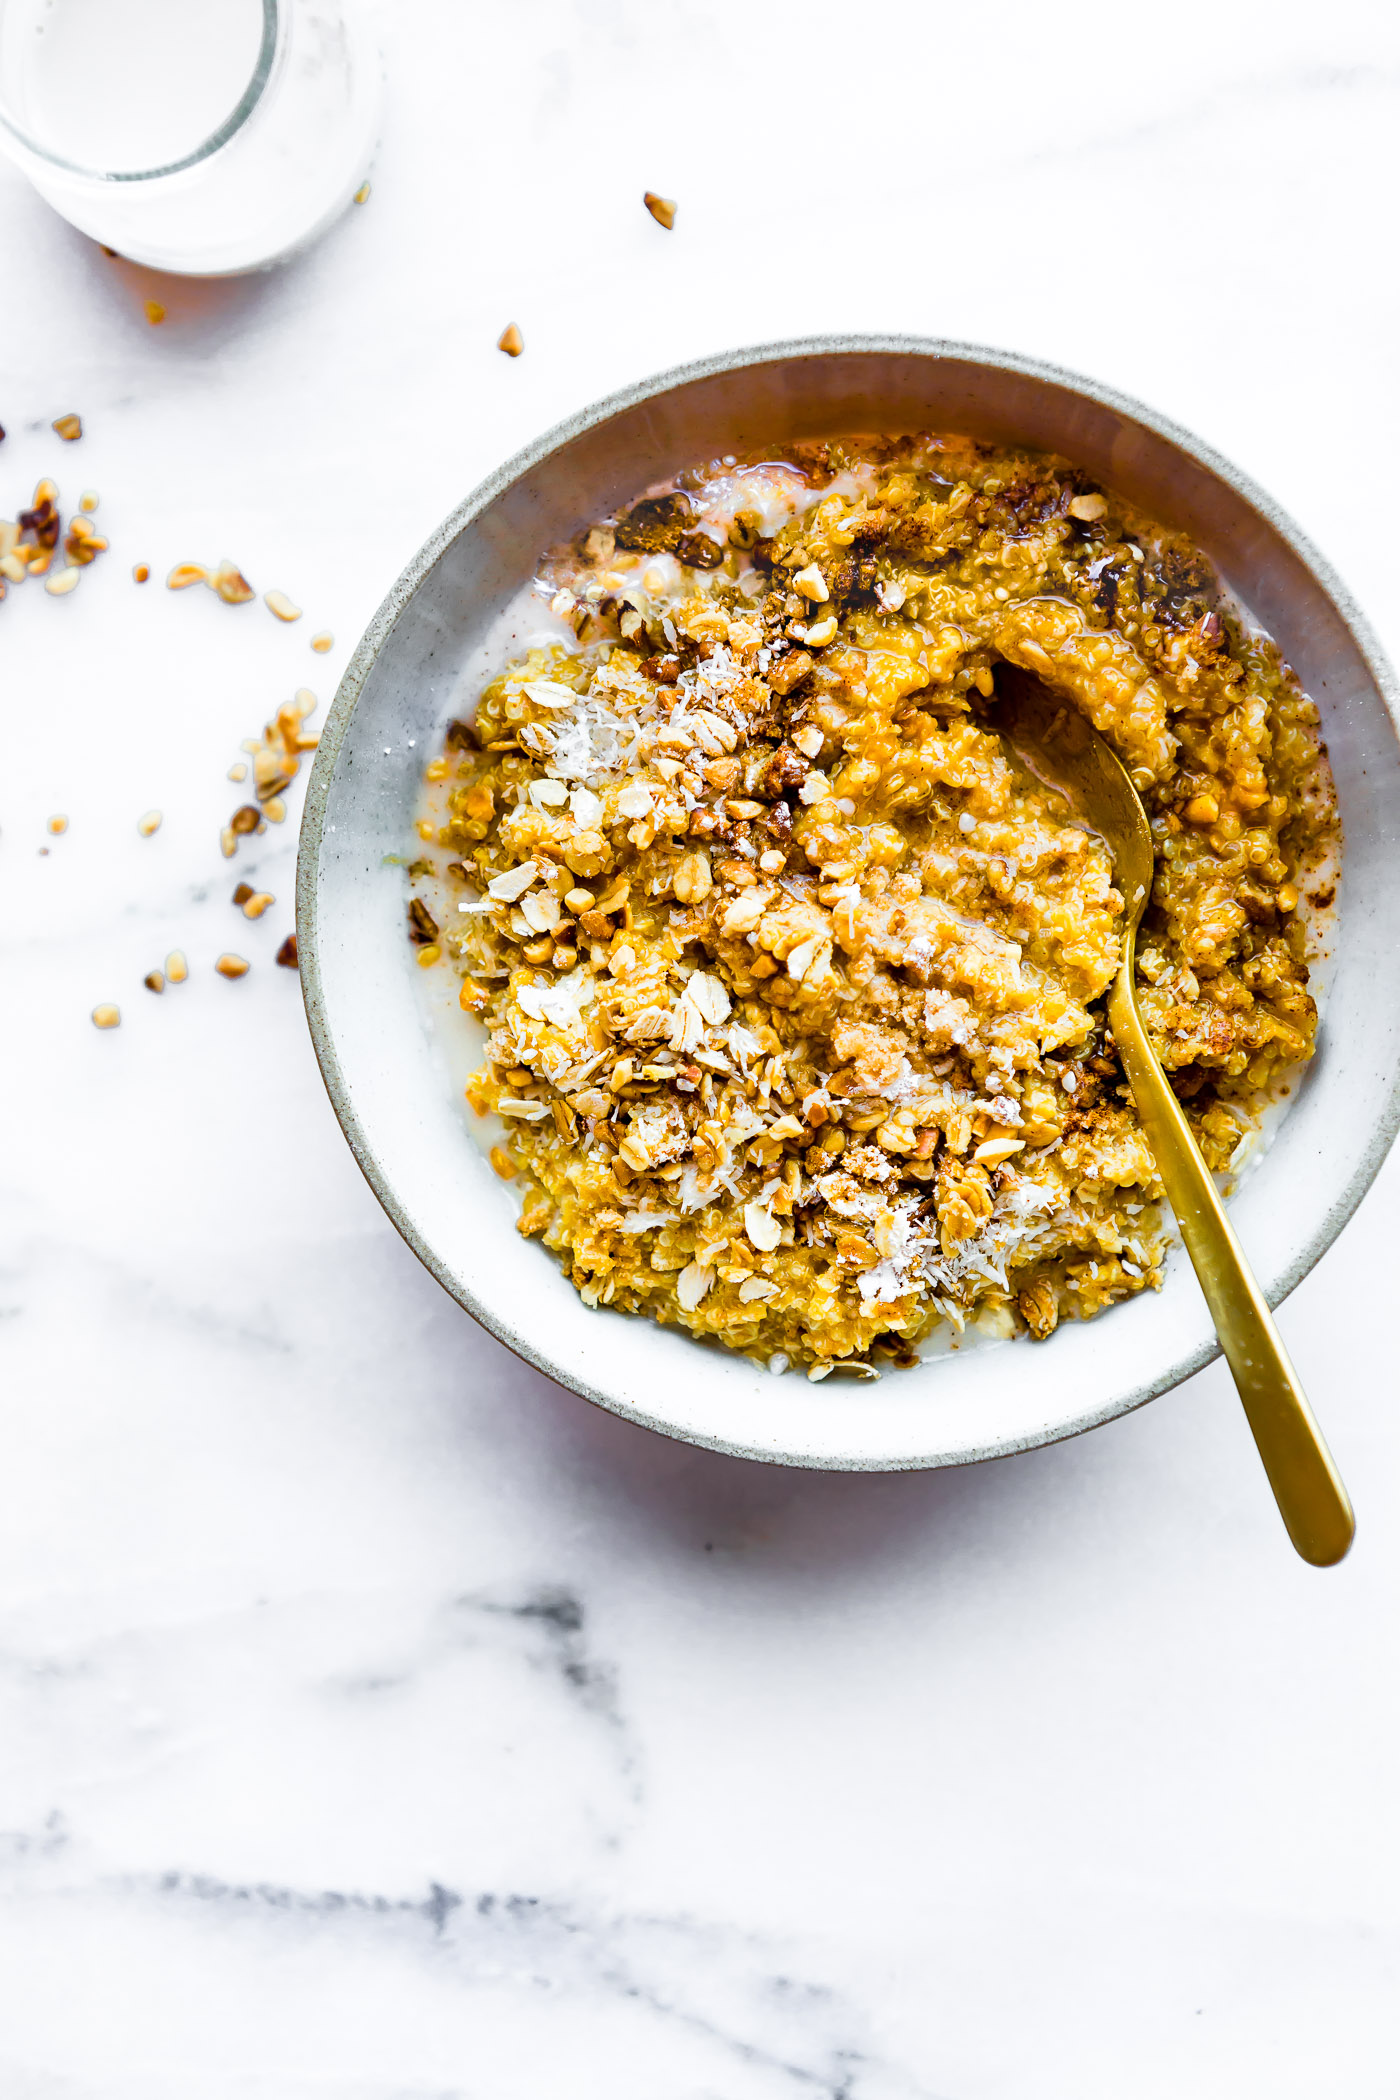 Overhead view stone bowl filled with serving of creamy pumpkin quinoa breakfast.